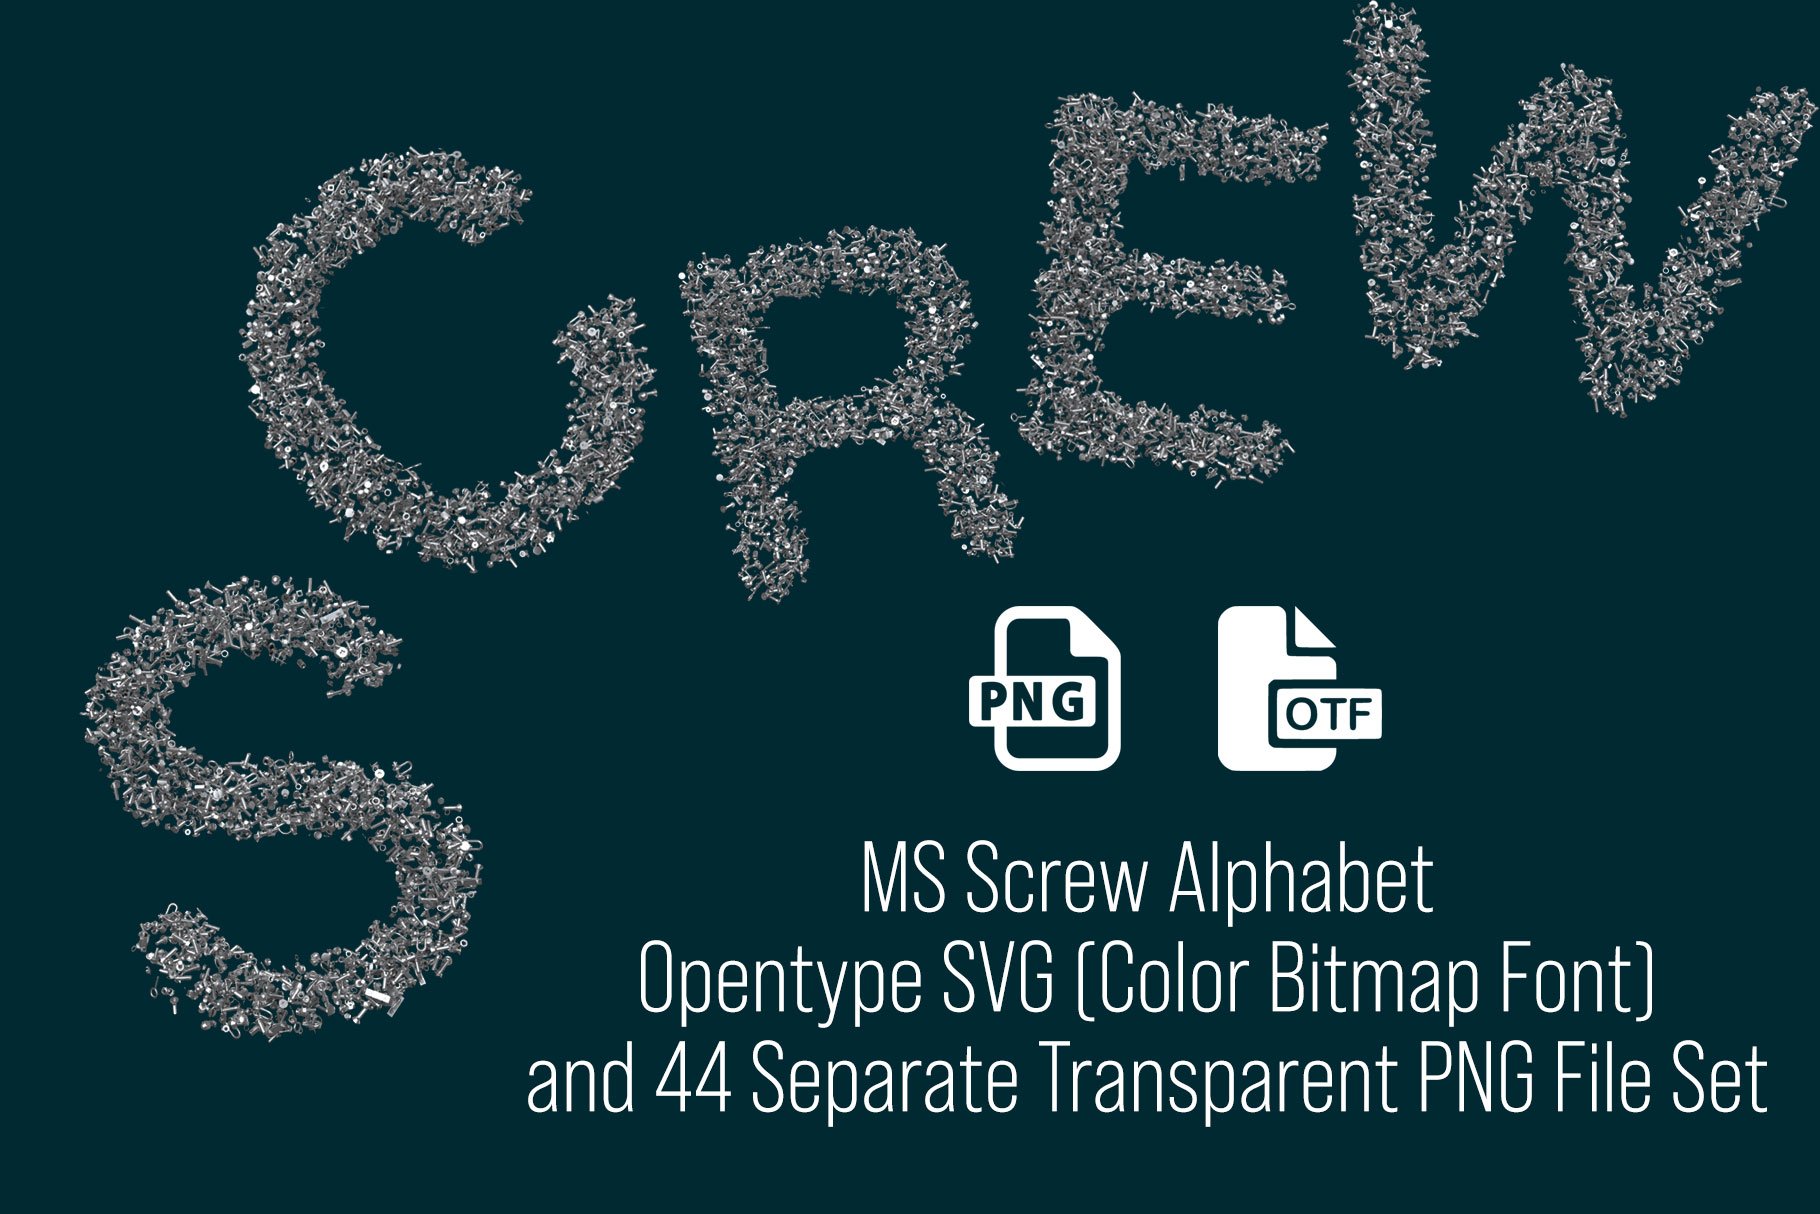 Screw Opentype SVG Font & PNGs cover image.